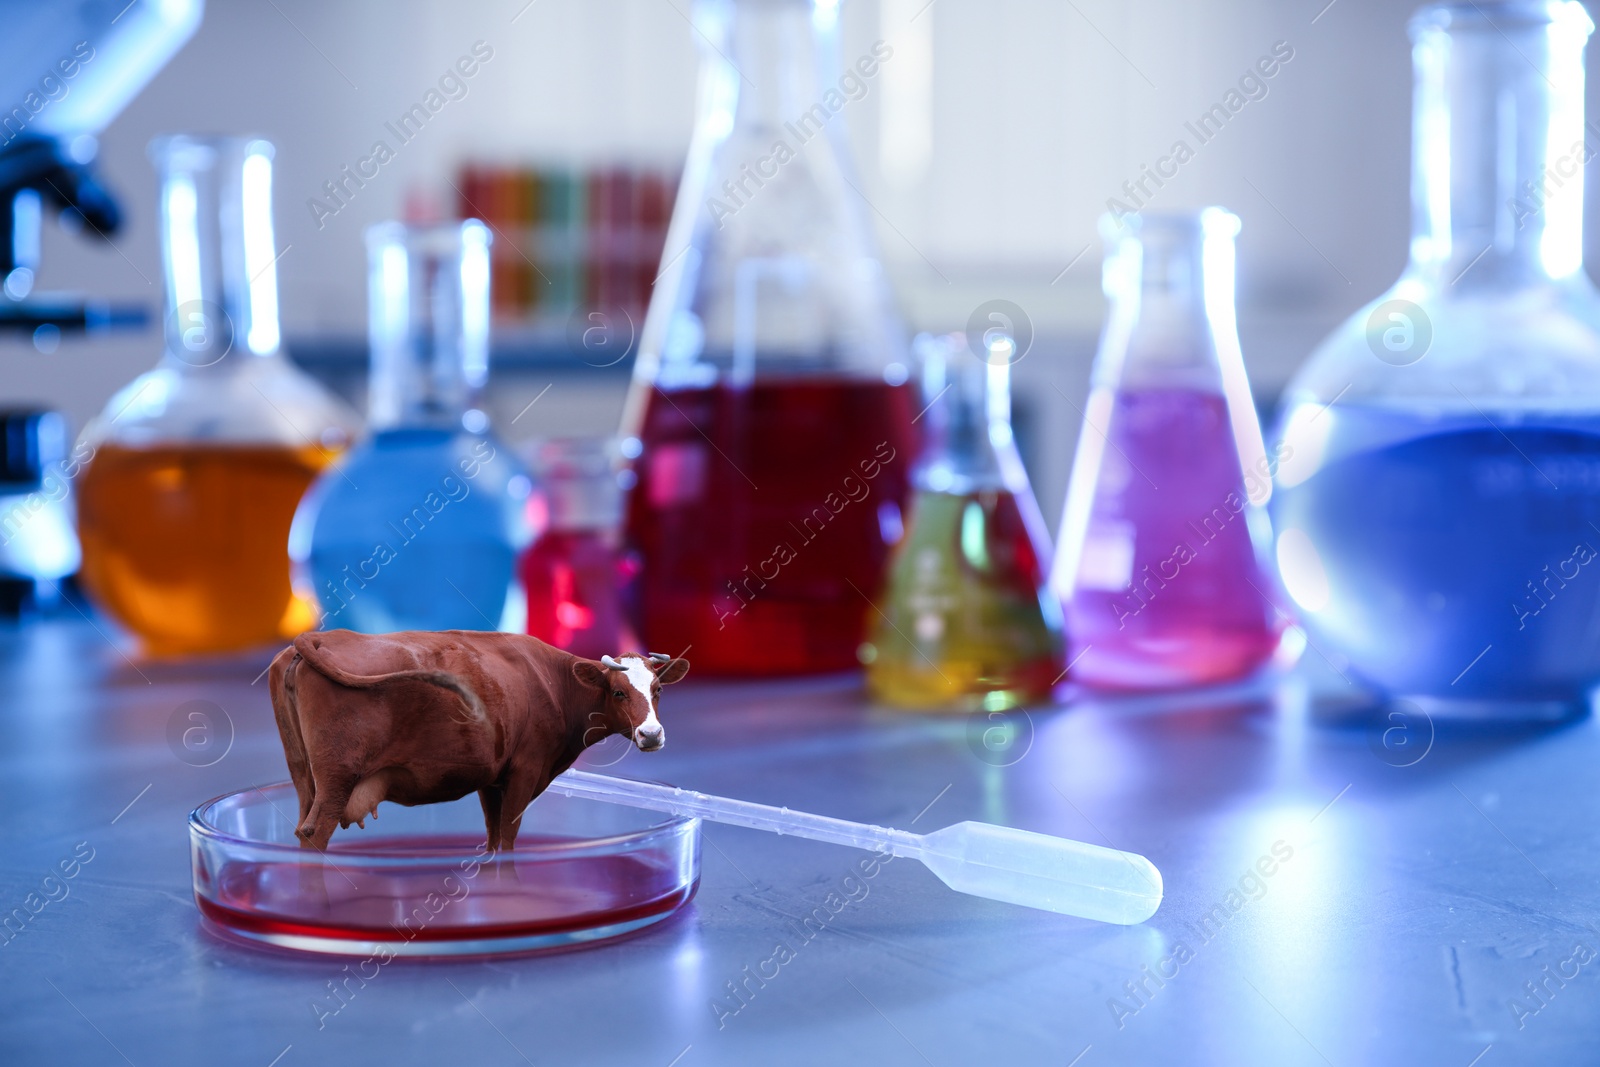 Image of Small cow in Petri dish on laboratory table. Cultured meat concept